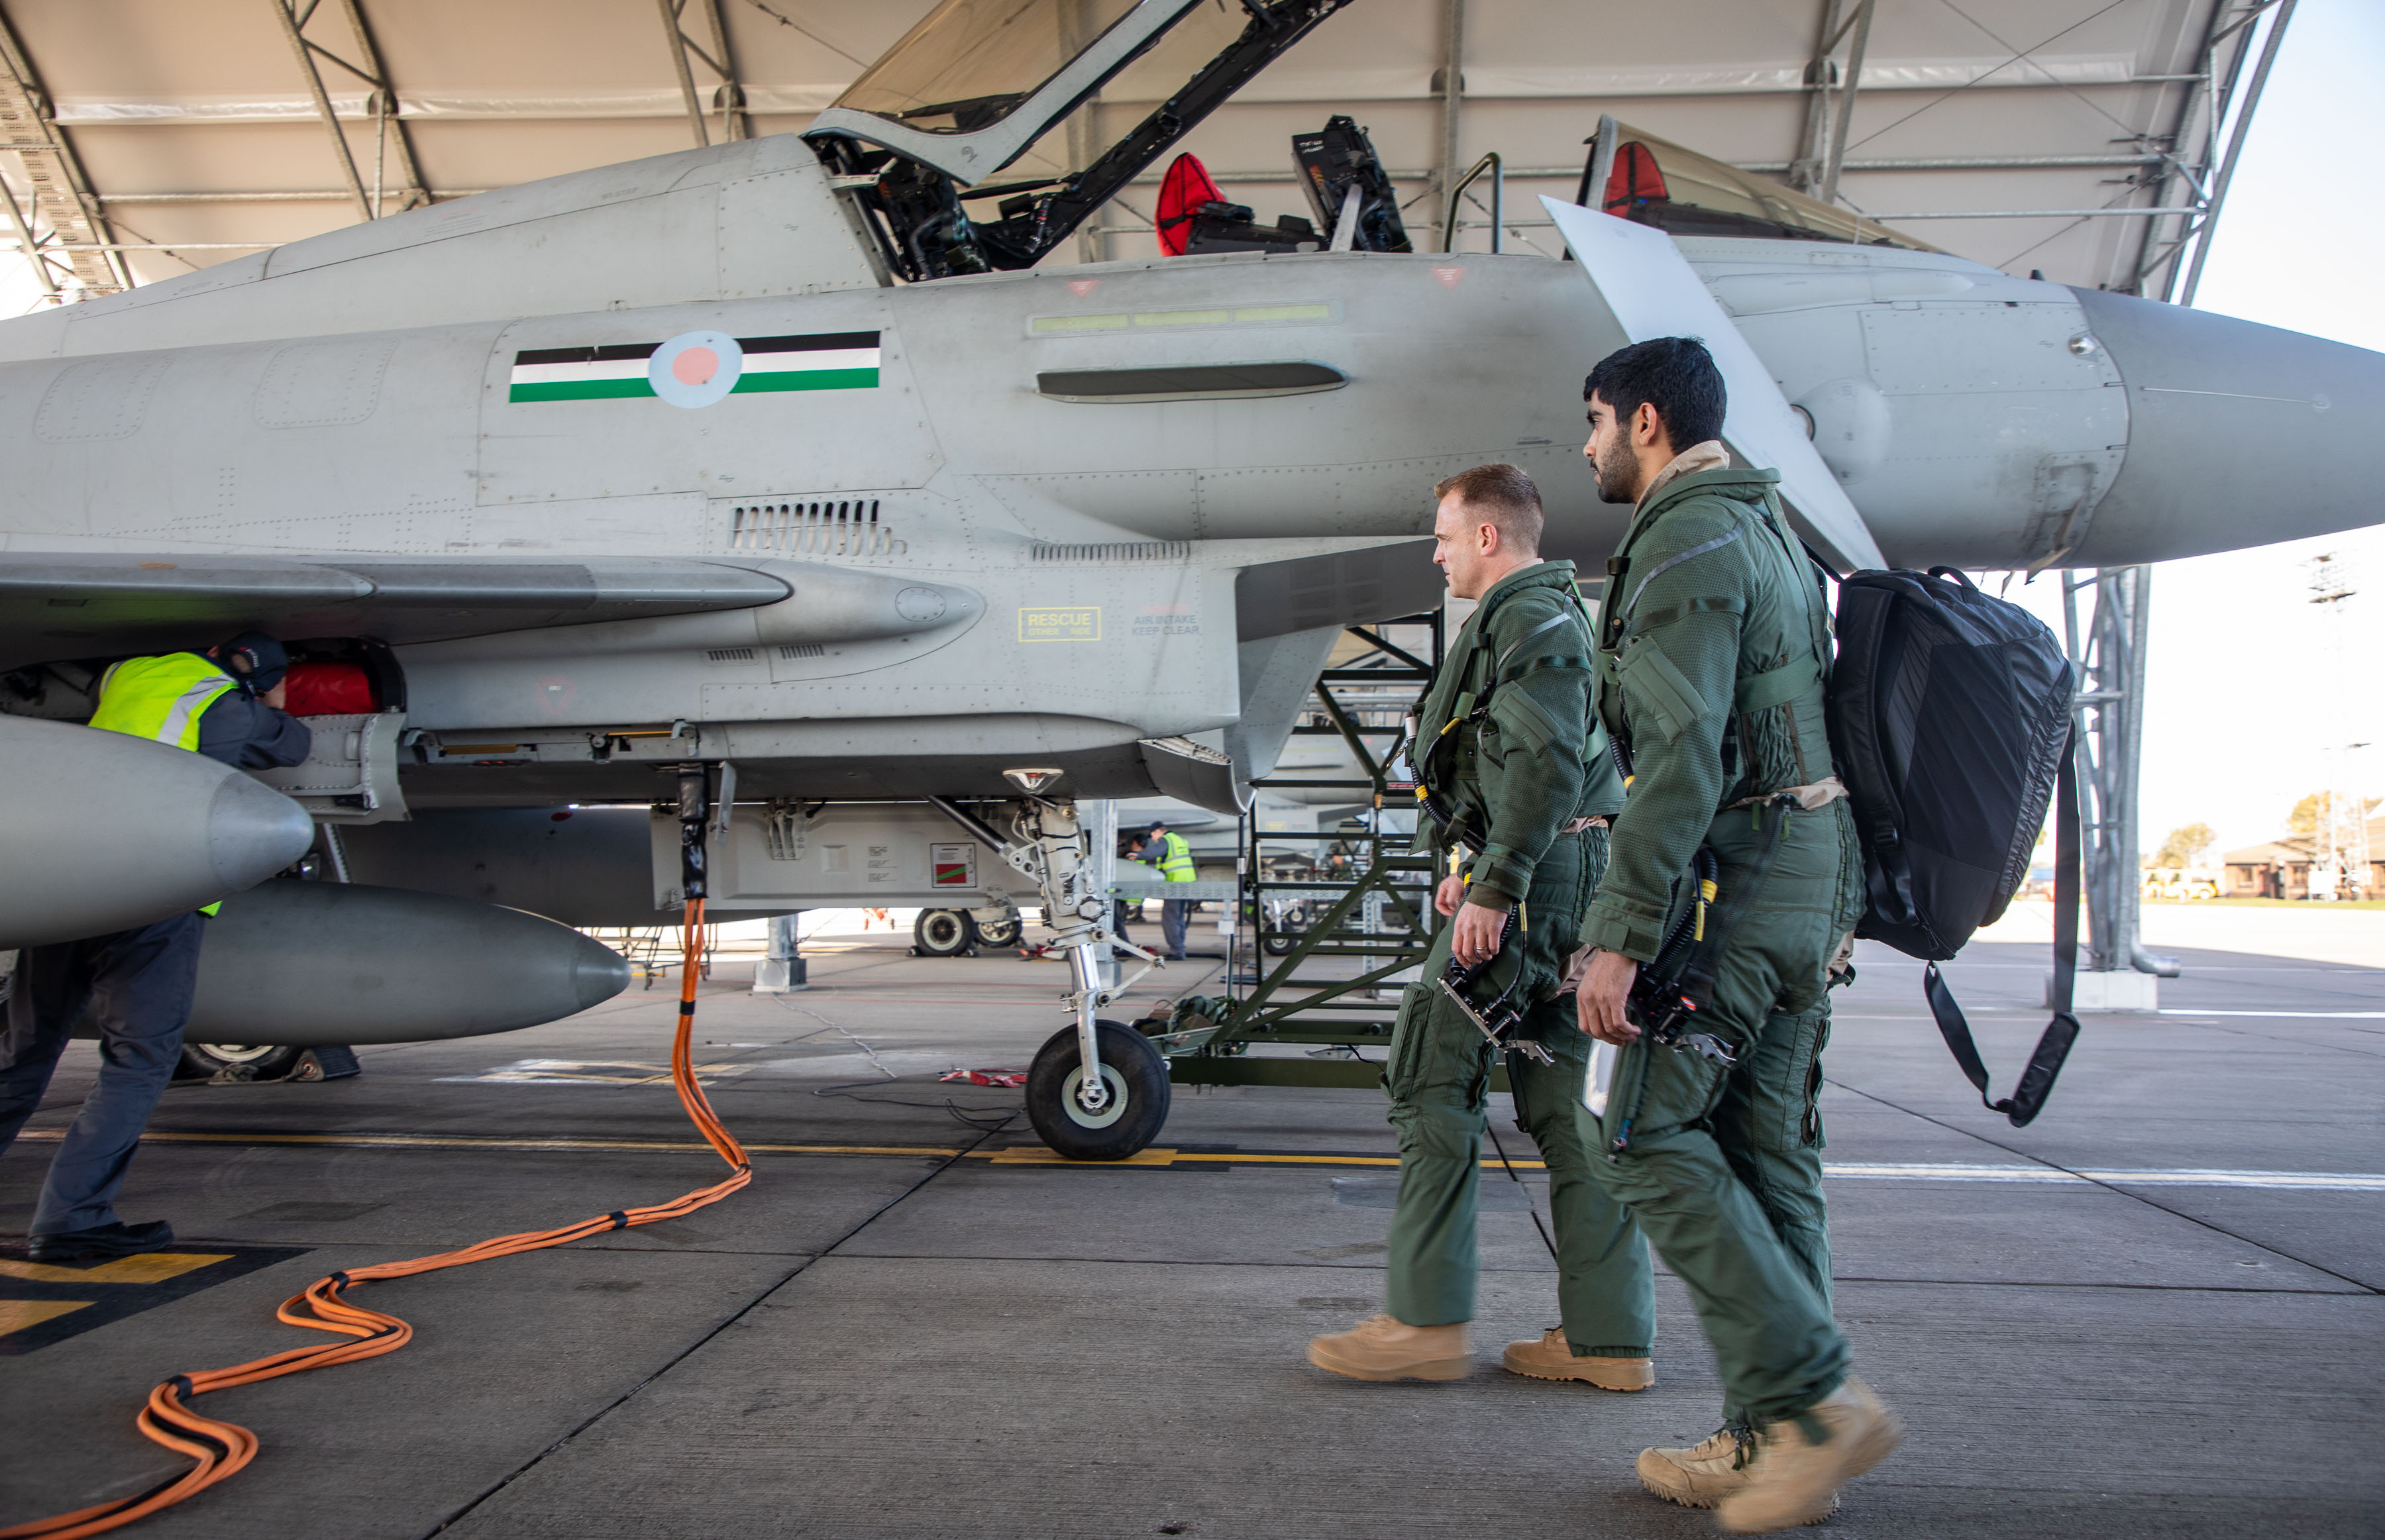 RAF completes its support for the FIFA World Cup 2022 in Qatar | Royal ...